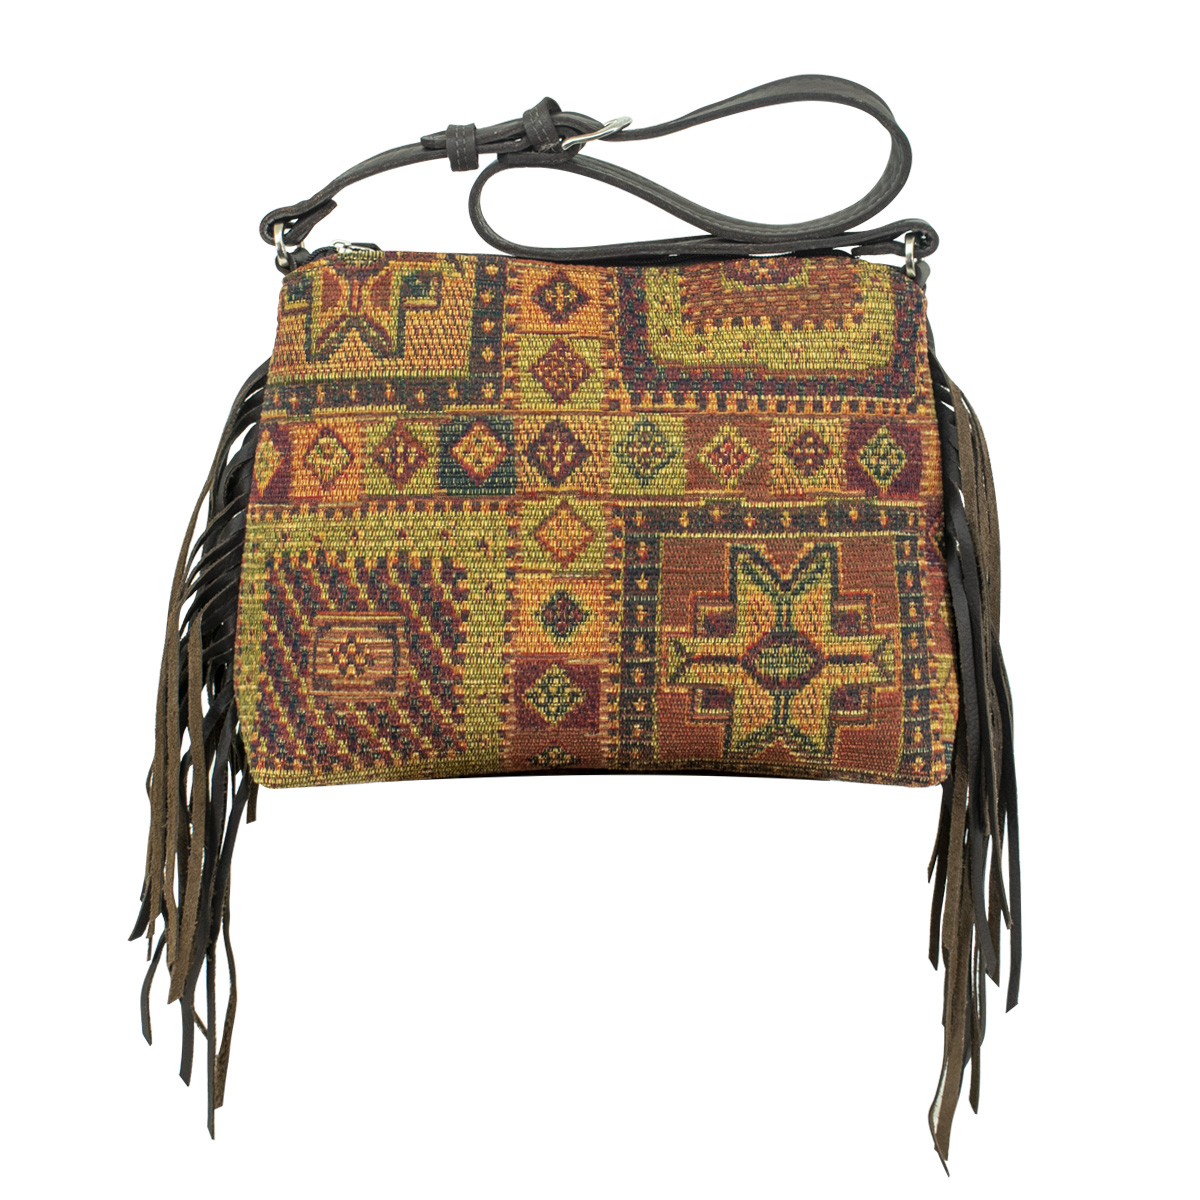 Picture of American West 4008170F Hand Woven Tapestry Zip Top Shoulder Bag with Fringe, Multi Color